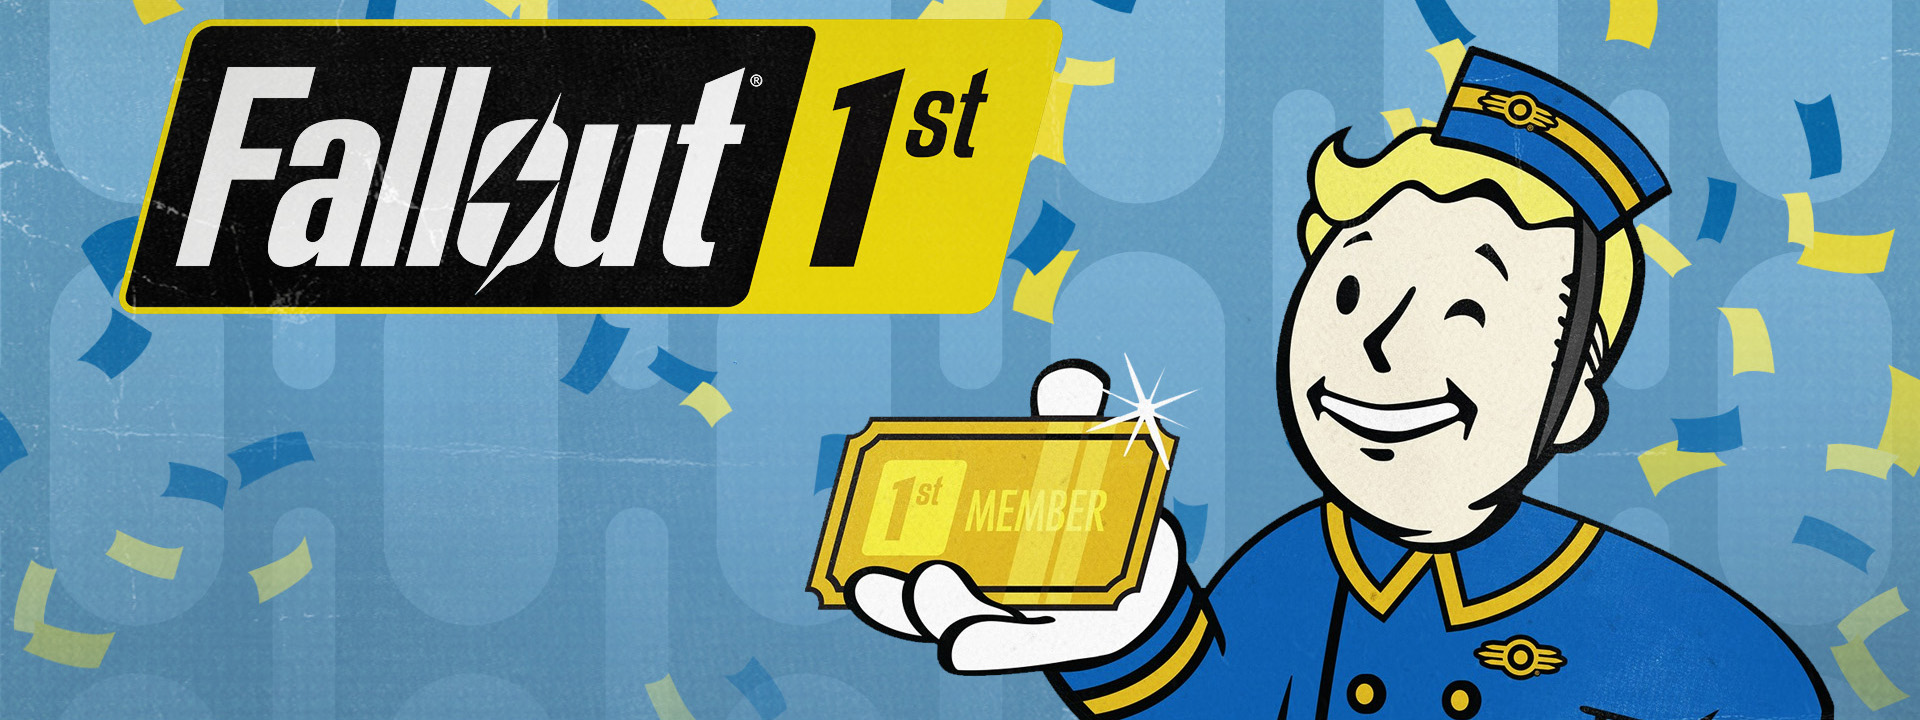 Fallout 1st steam 1 month membership фото 7